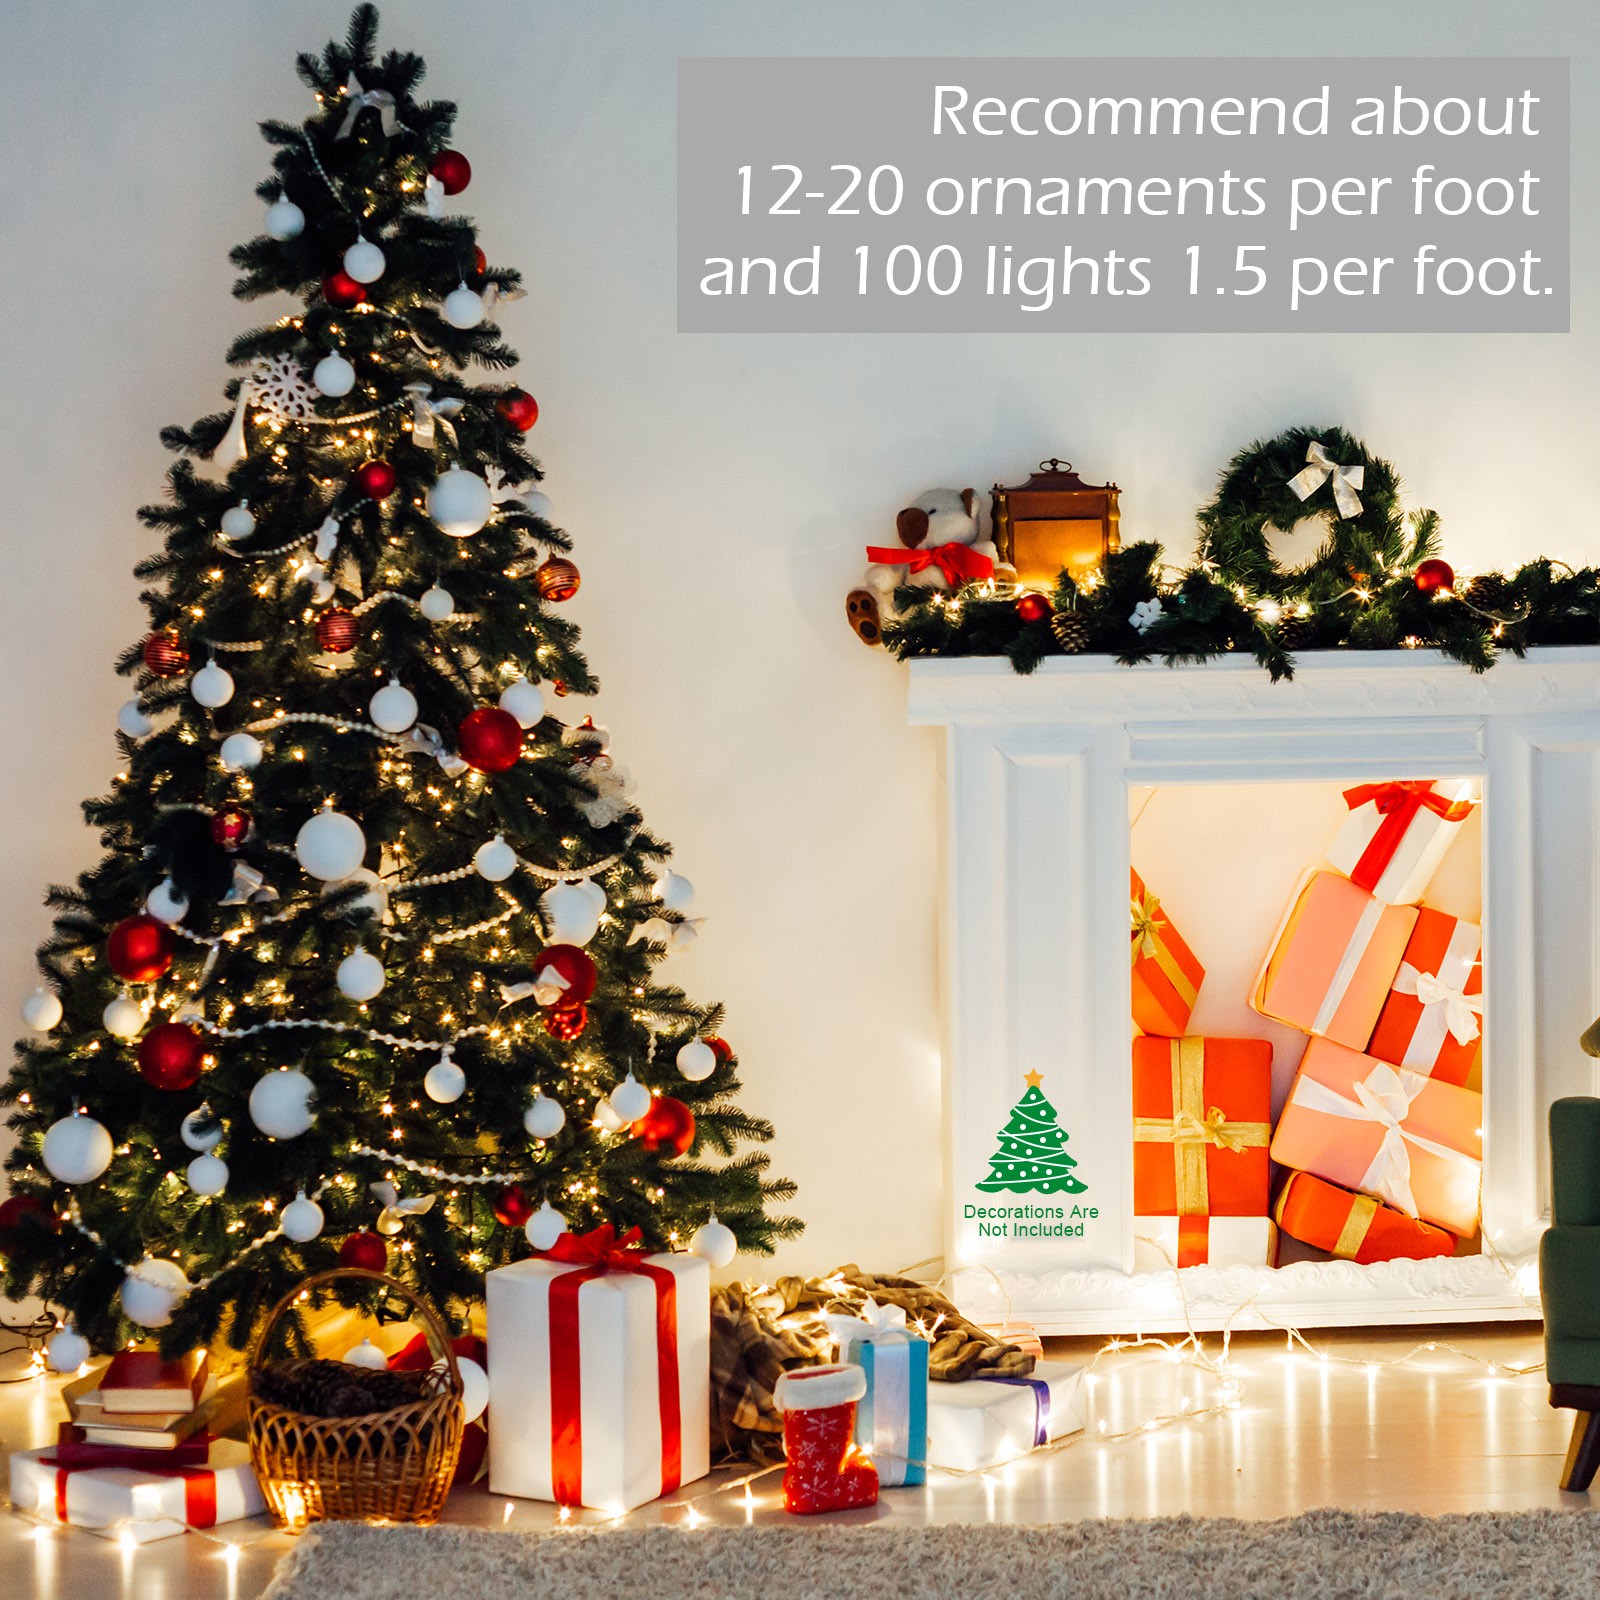 BEWAVE Artificial Christmas Tree with Light, Premium Unlit Spruce Full Xmas Tree Decor for Home Office Indoor Decoration, 7 Ft